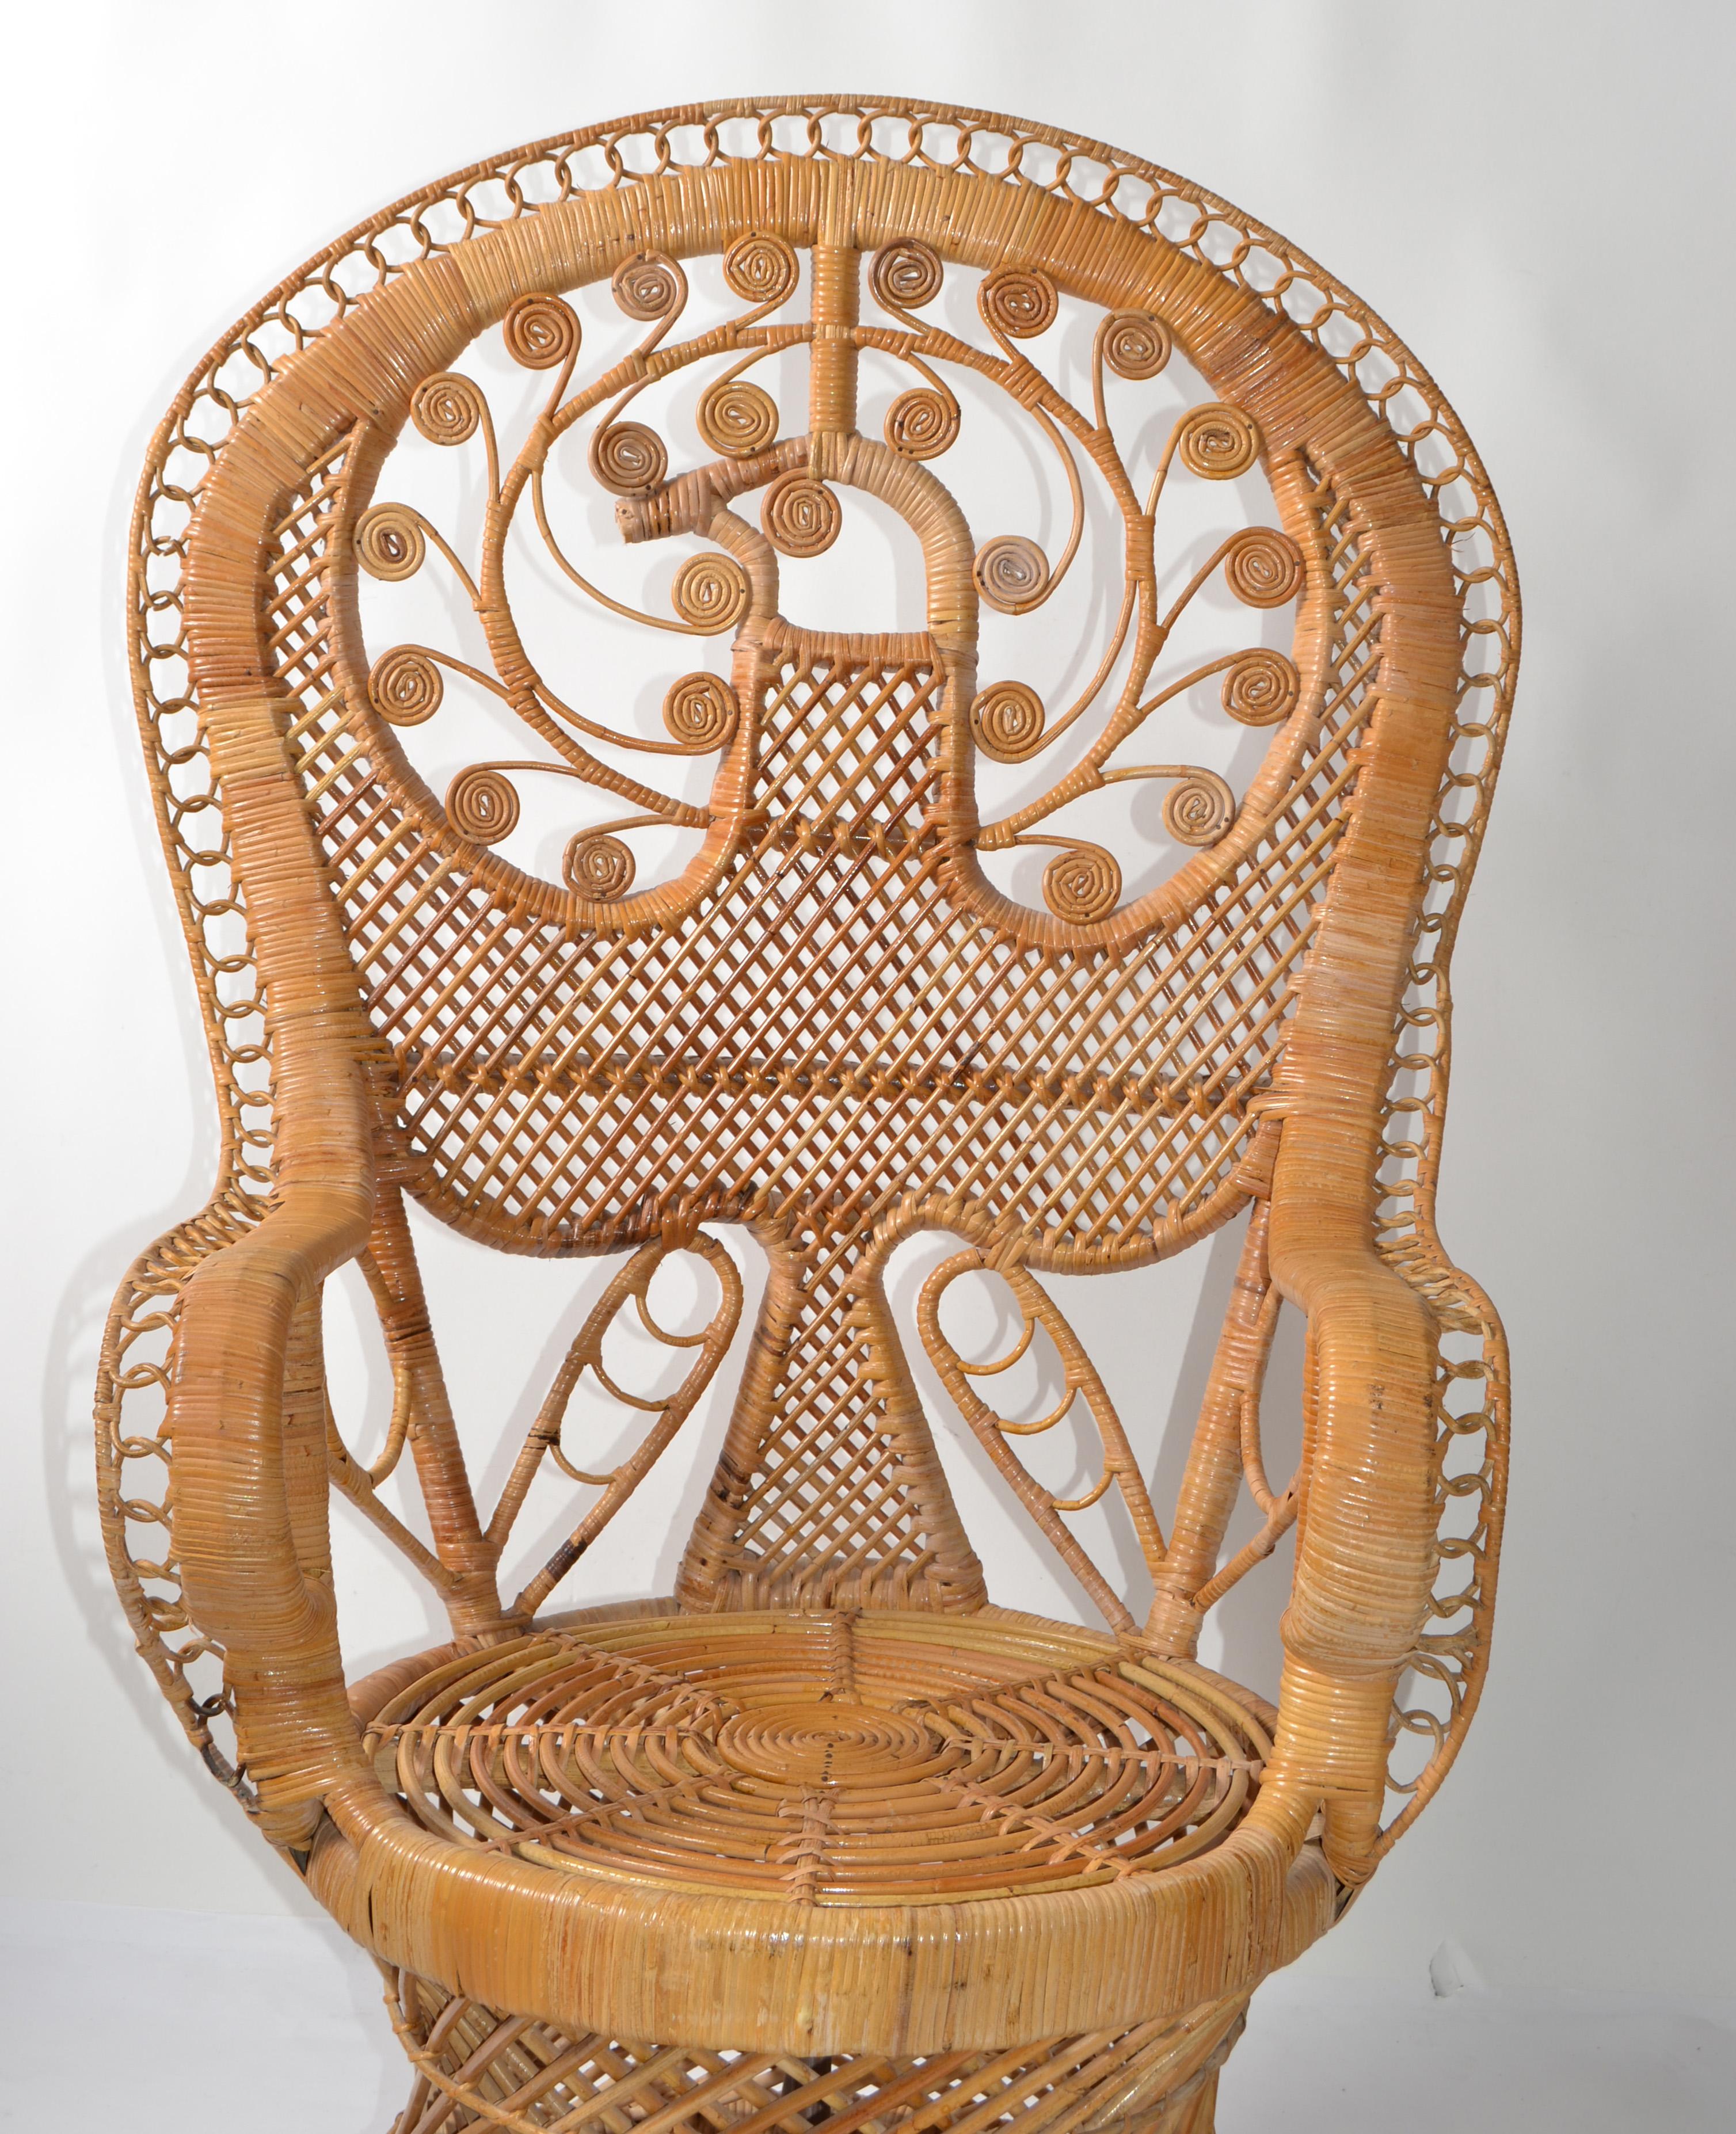 Fait main Coastal Vintage Round Rattan Accent Table Hand-Woven Wicker Caning Peacock Chair en vente